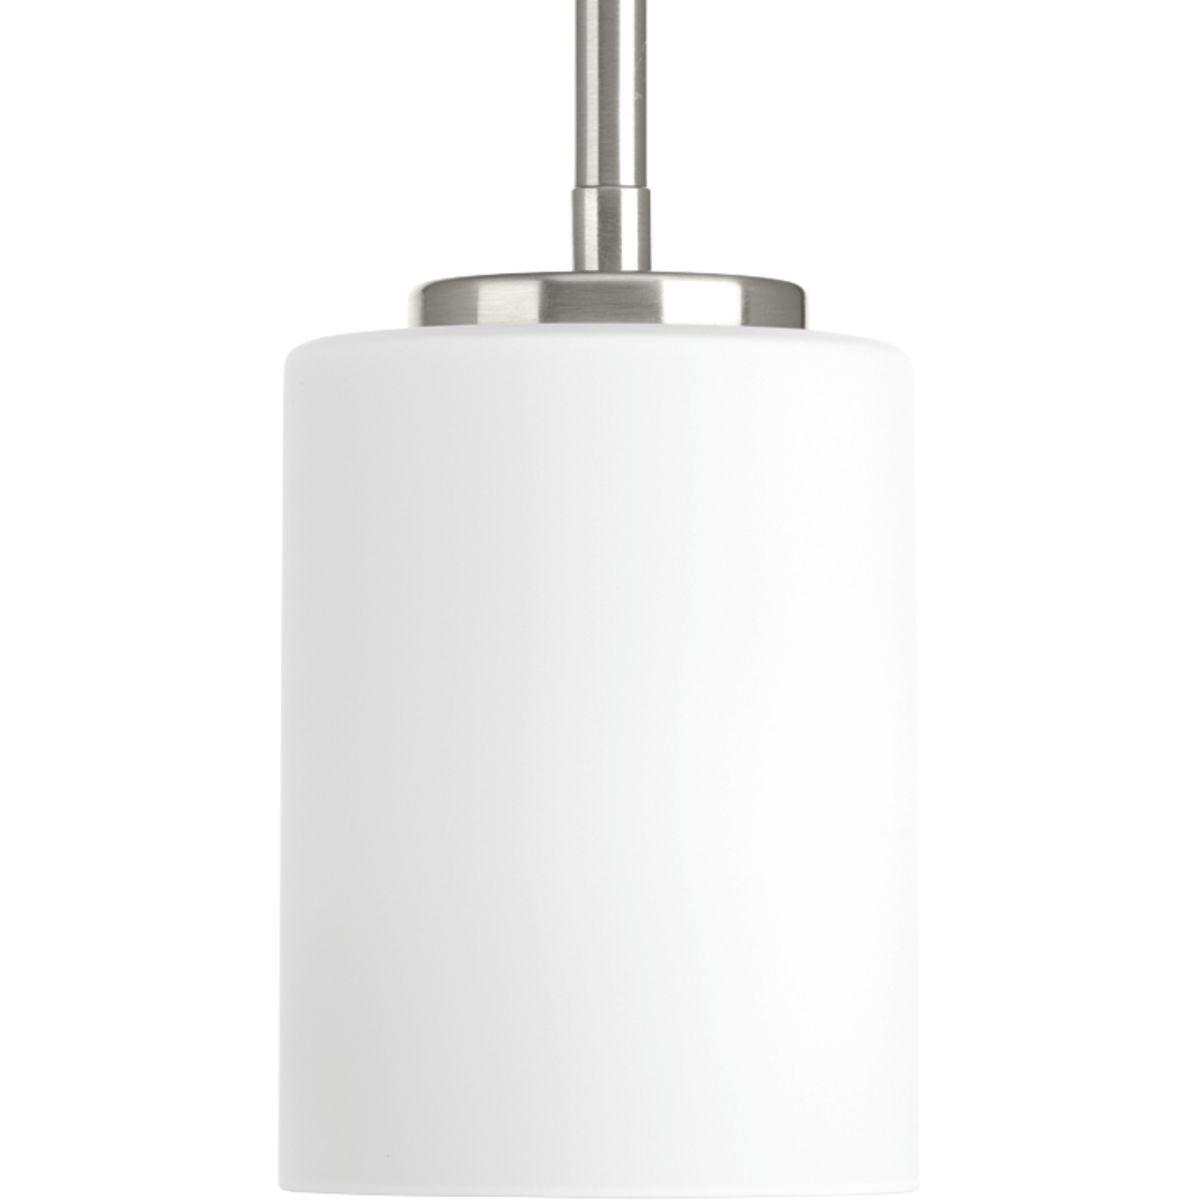 Hubbell P5170-09 One-light mini-pendant from the Replay Collection, features a linear form that provides a pleasingly elegant accent to your home. A sleek, metallic finish is complemented by white glass diffusers for a clean, modern silhouette. Brushed Nickel finish.  ; S